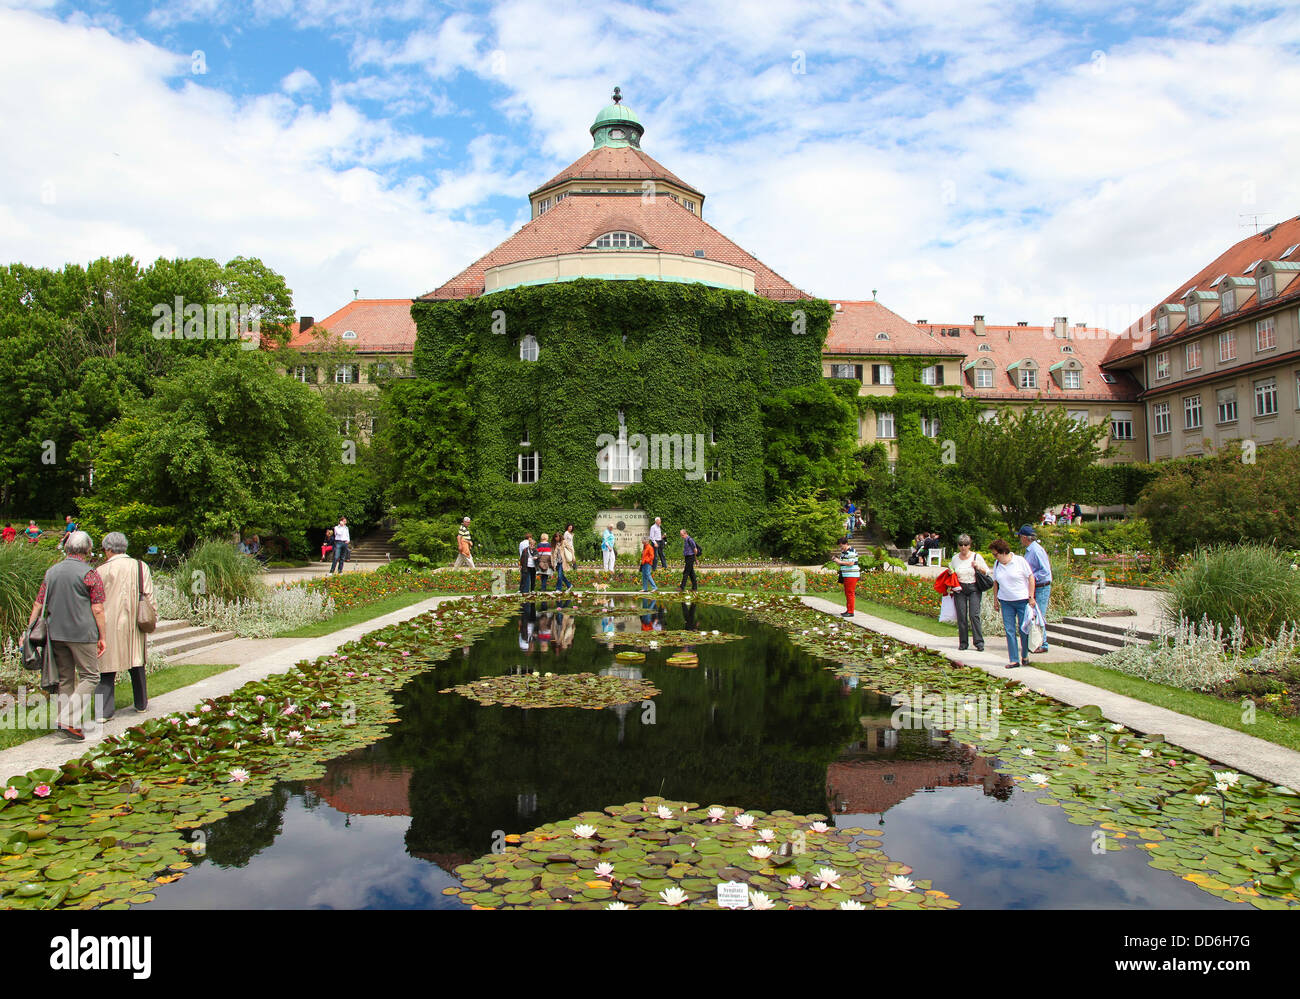 Nymphenburg Palace, the summer residence of the Bavarian kings, in Munich, Austria. Stock Photo